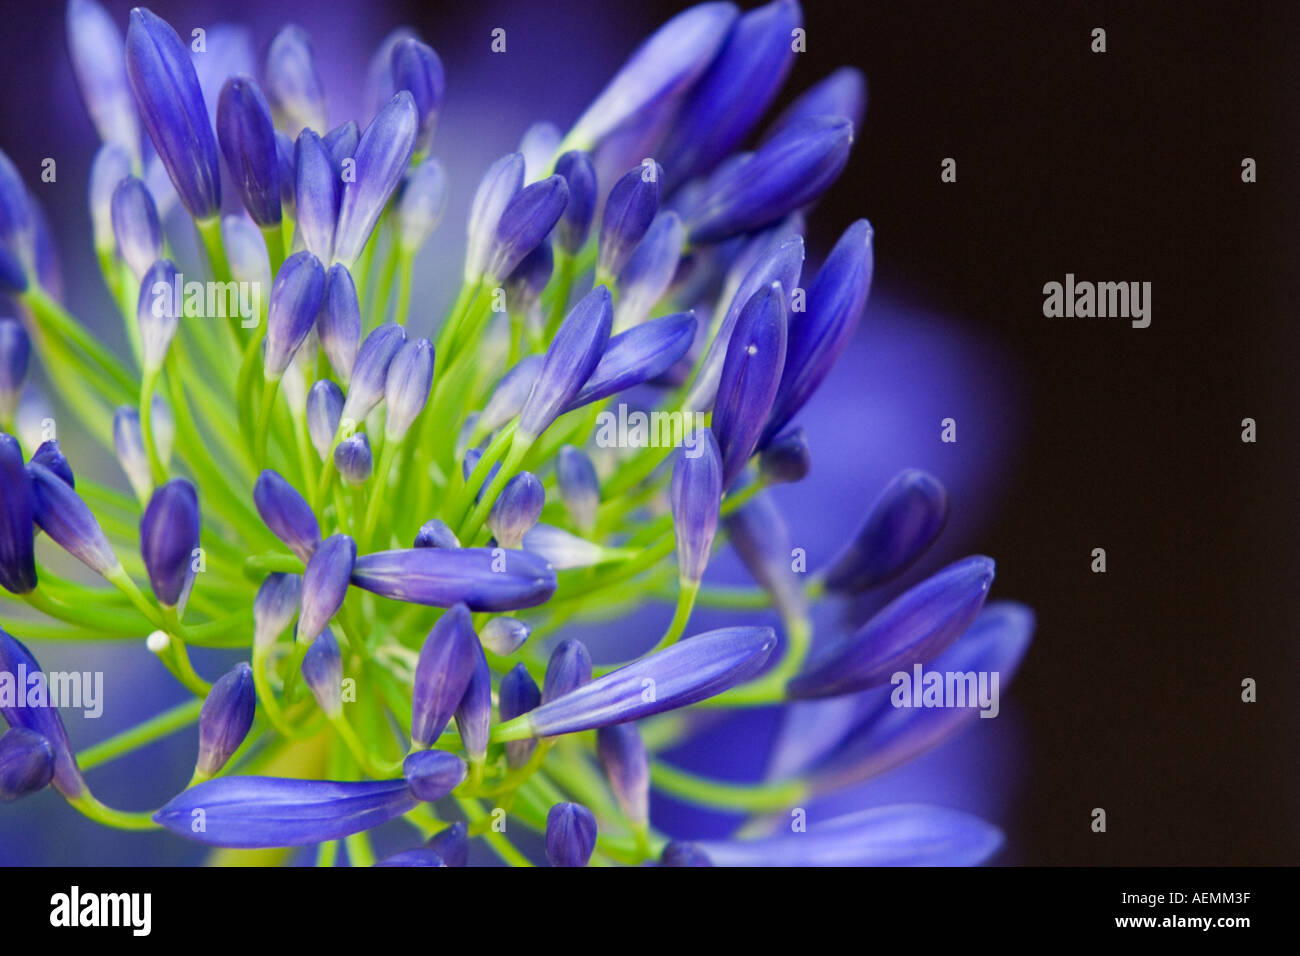 Blue Purple and Green Agapanthus Flower Stock Photo